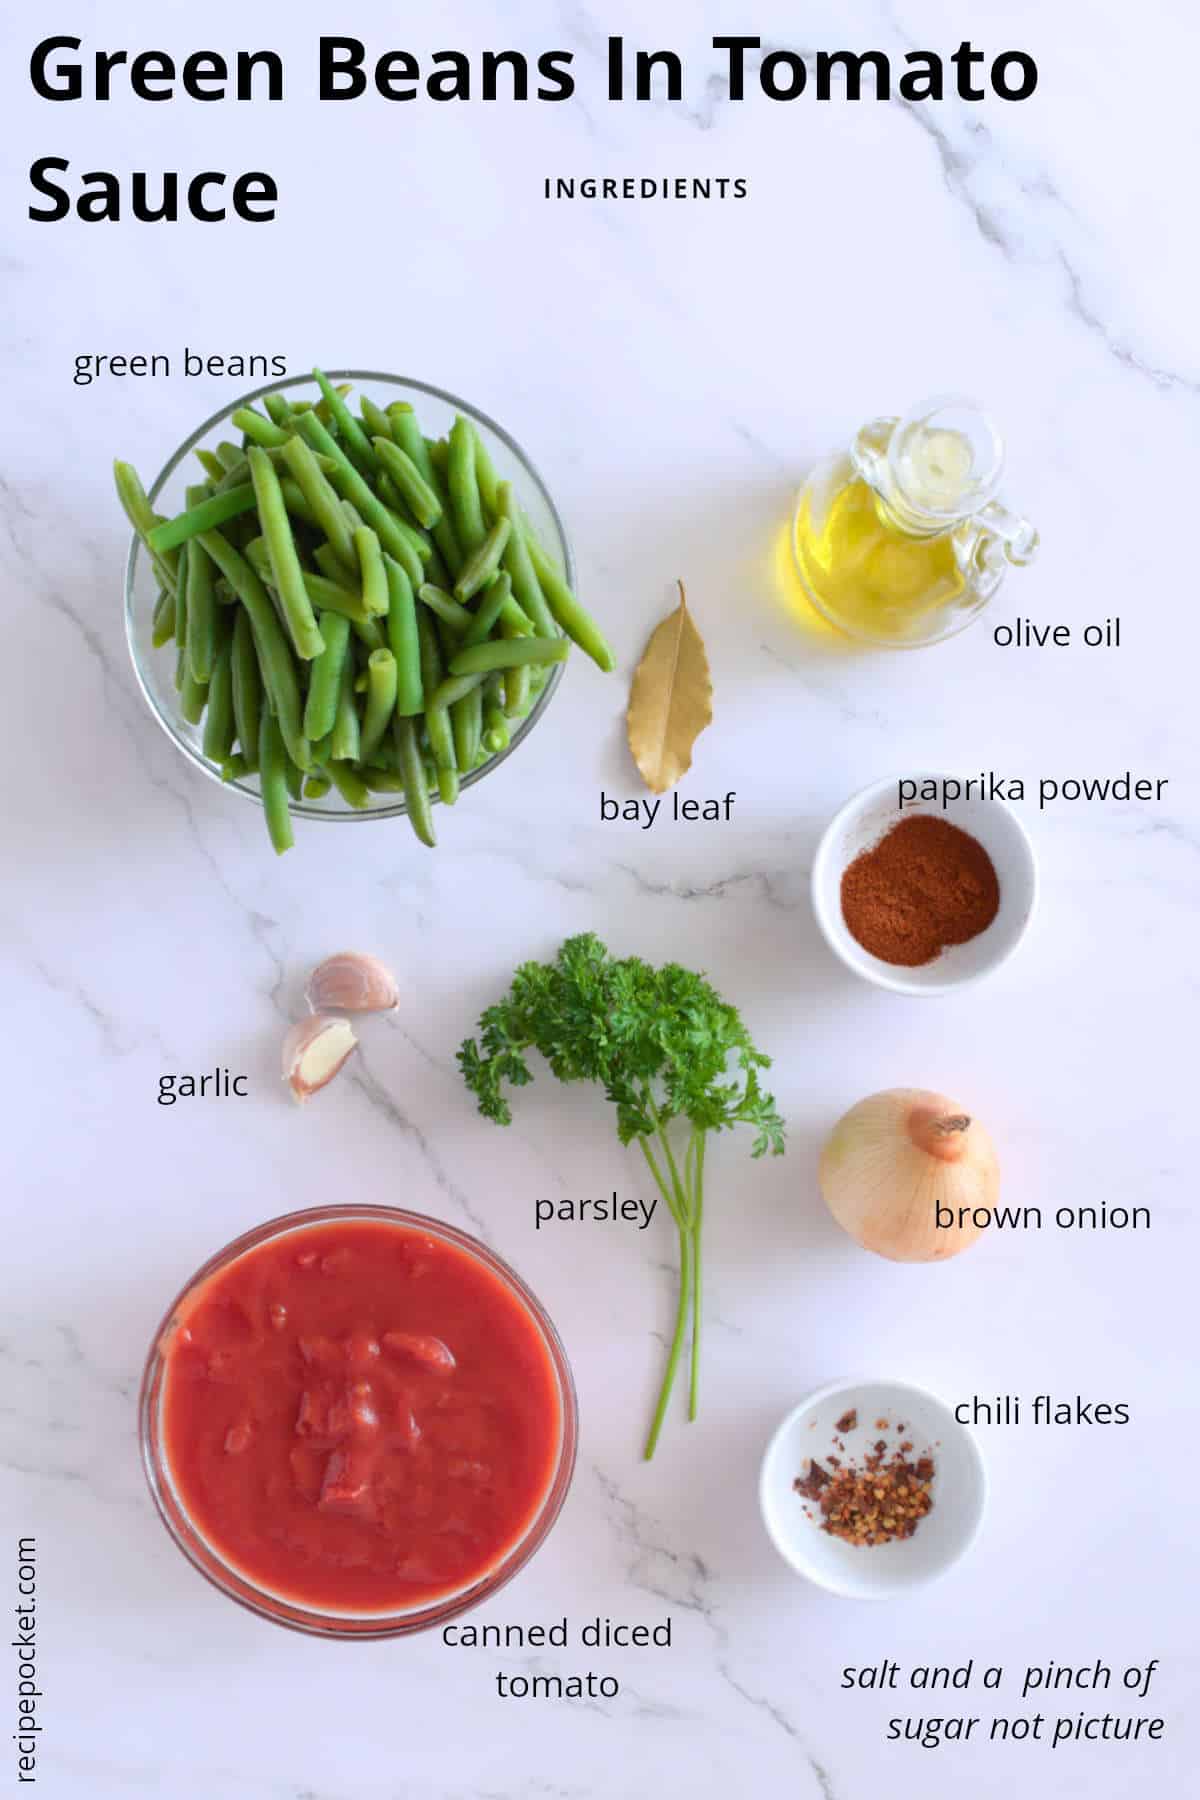 Image of ingredients needed to make beans in tomato sauce.